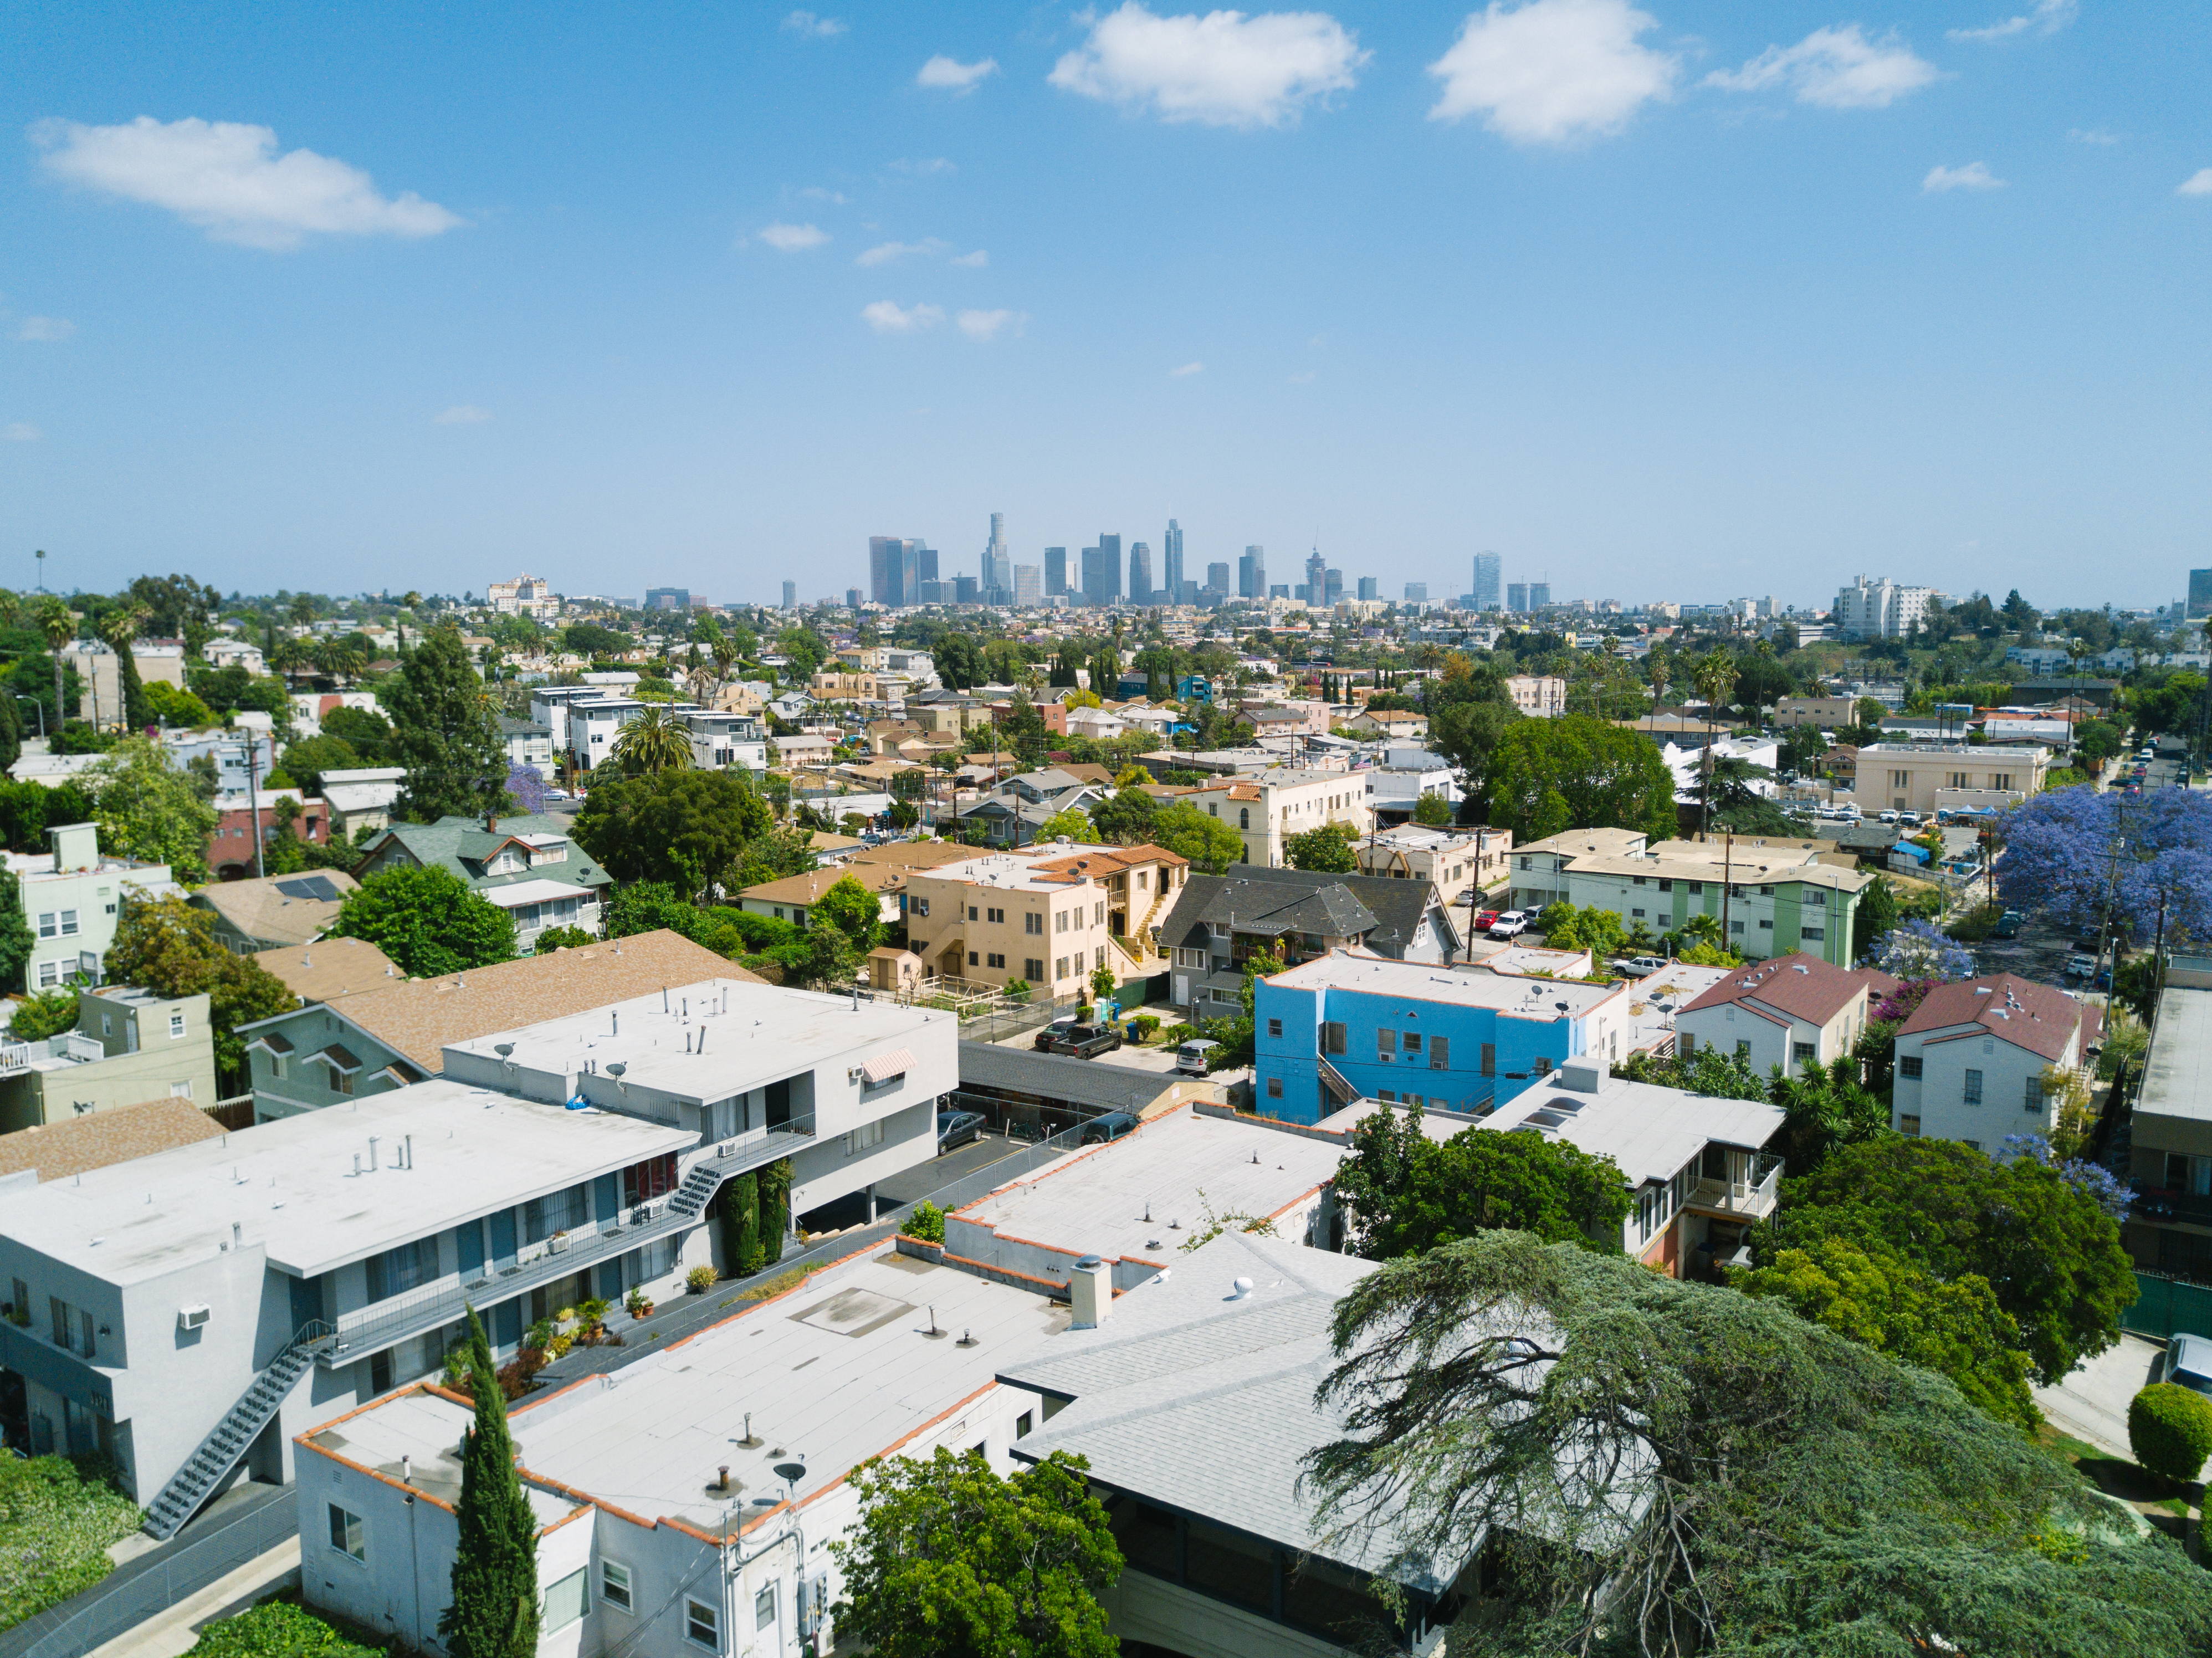 Aerial view of a dense residential neighborhoods sprawled out in front of Downtown Los Angeles. A cluster of skyscrapers poke out in the distance.